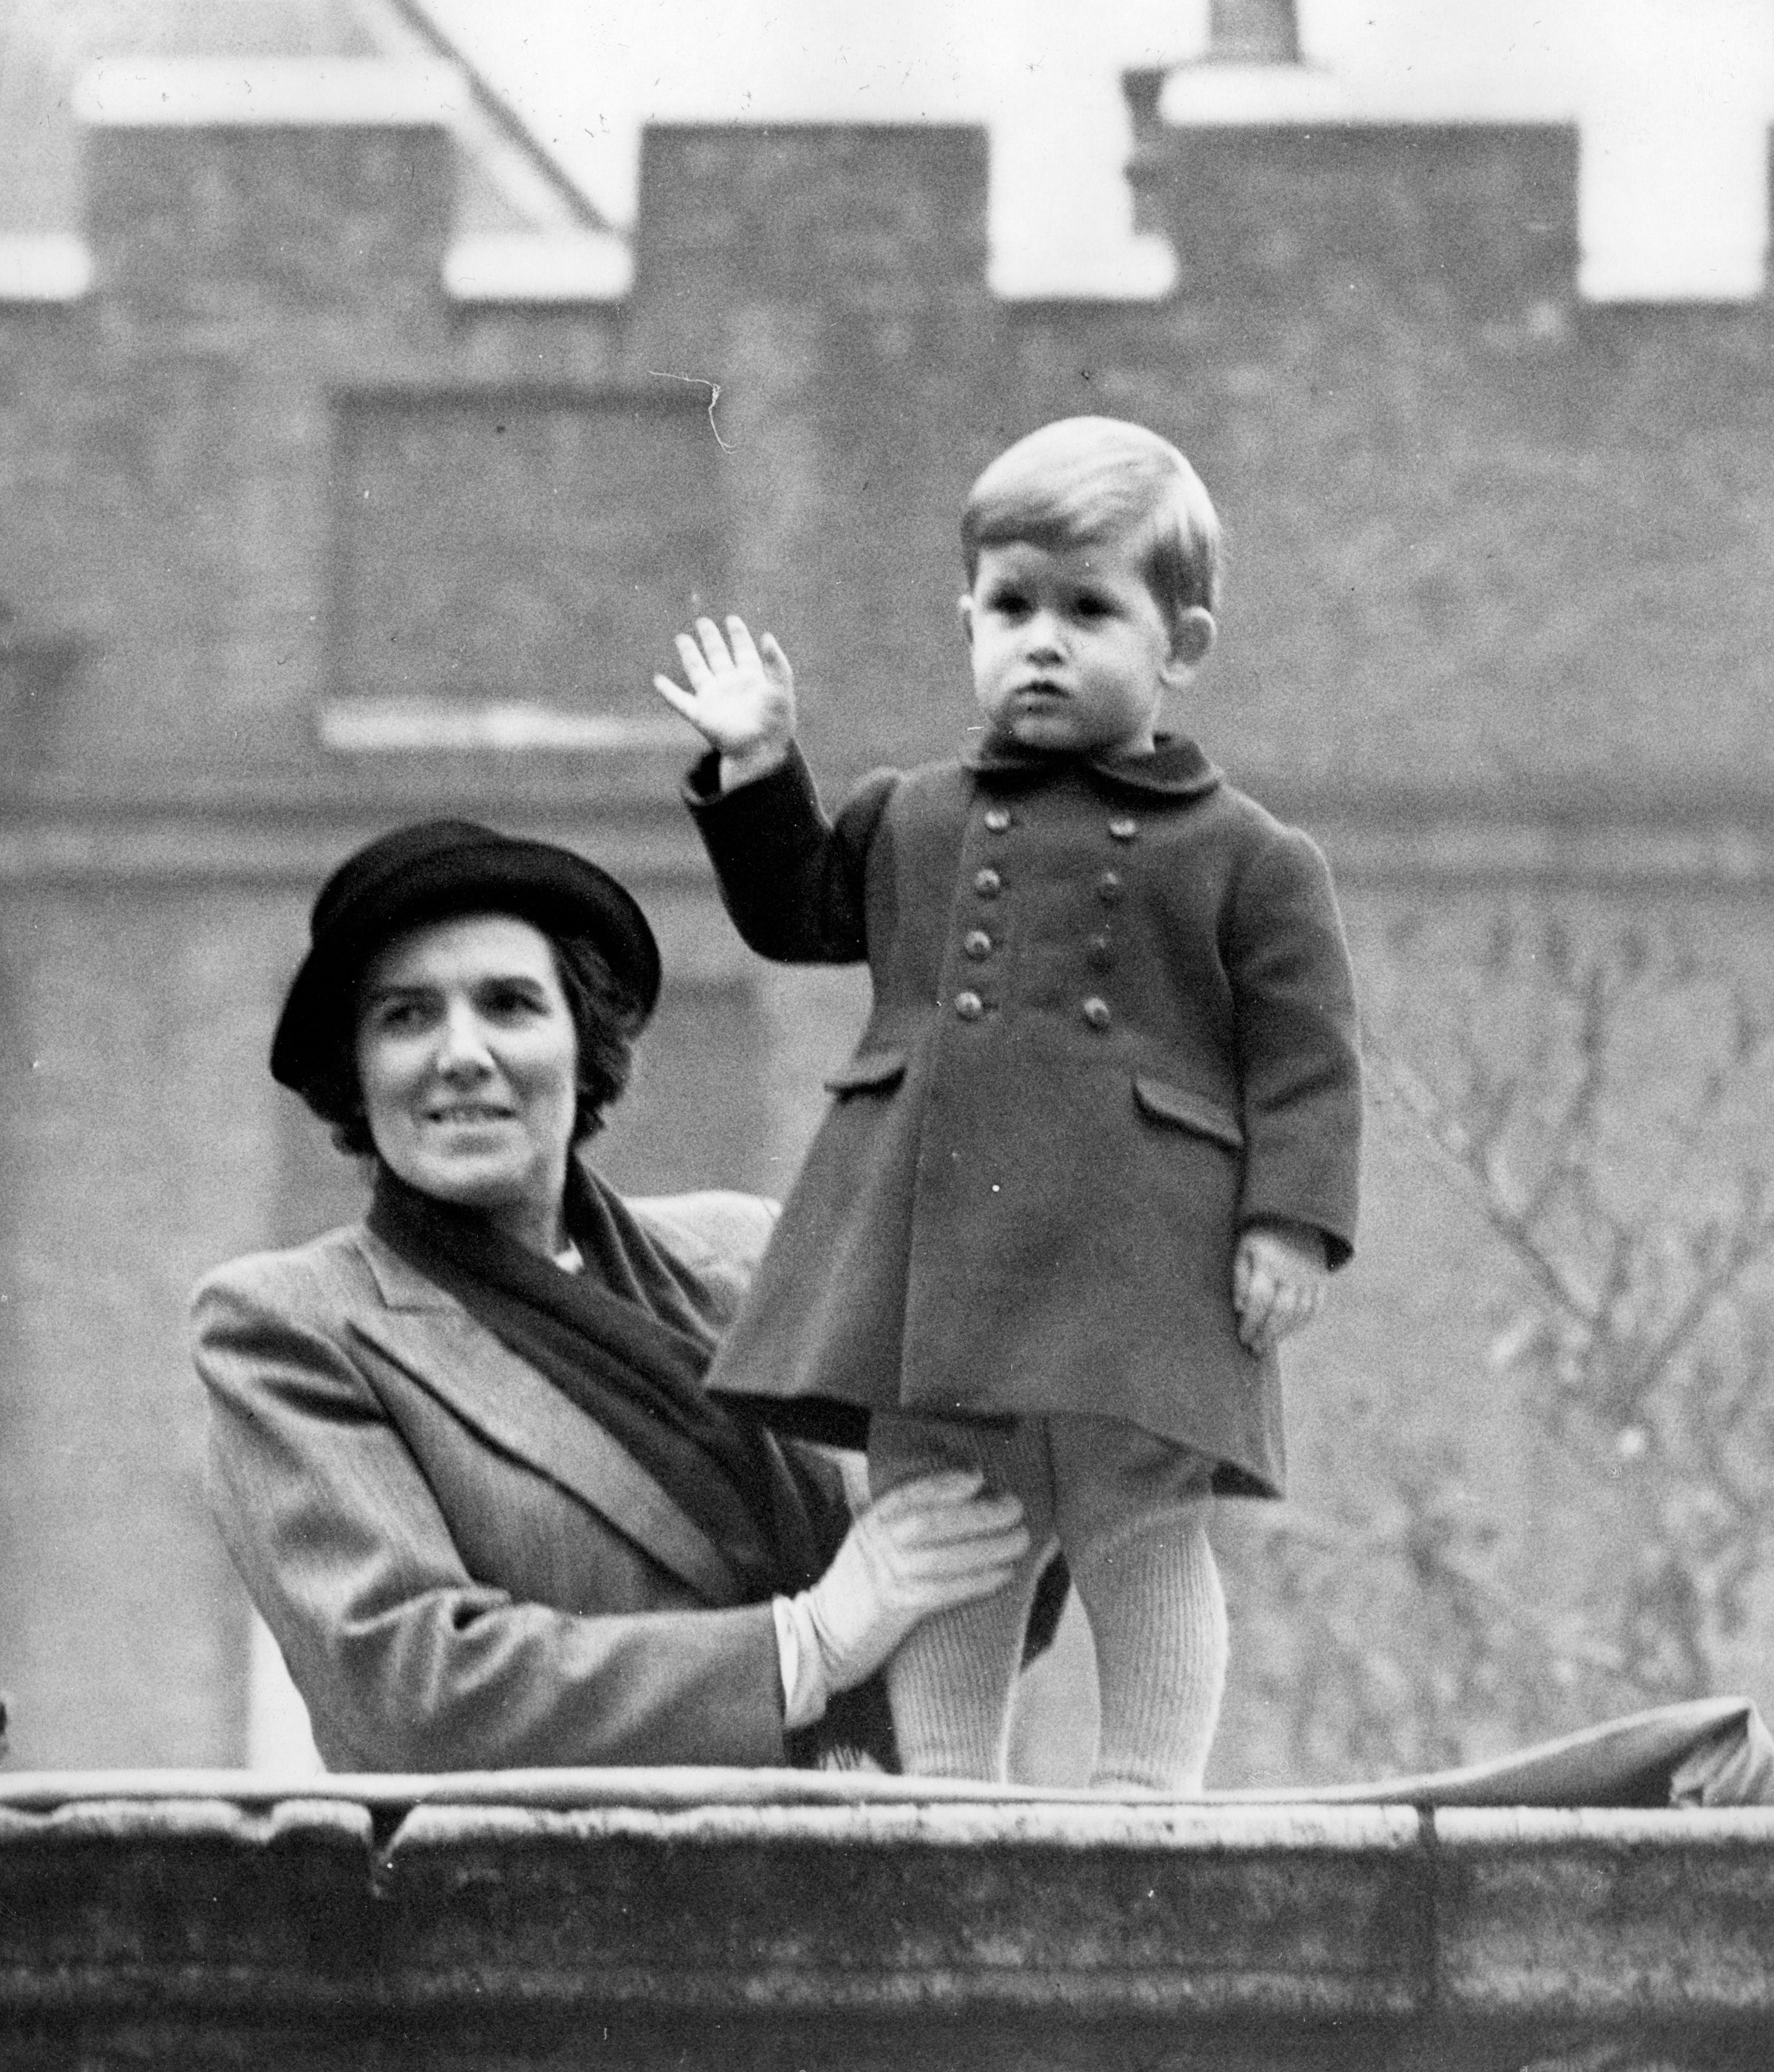 Prince Charles waves to the crowd from the wall of Clarence House before the State Opening of Parliament in 1952 (PA)